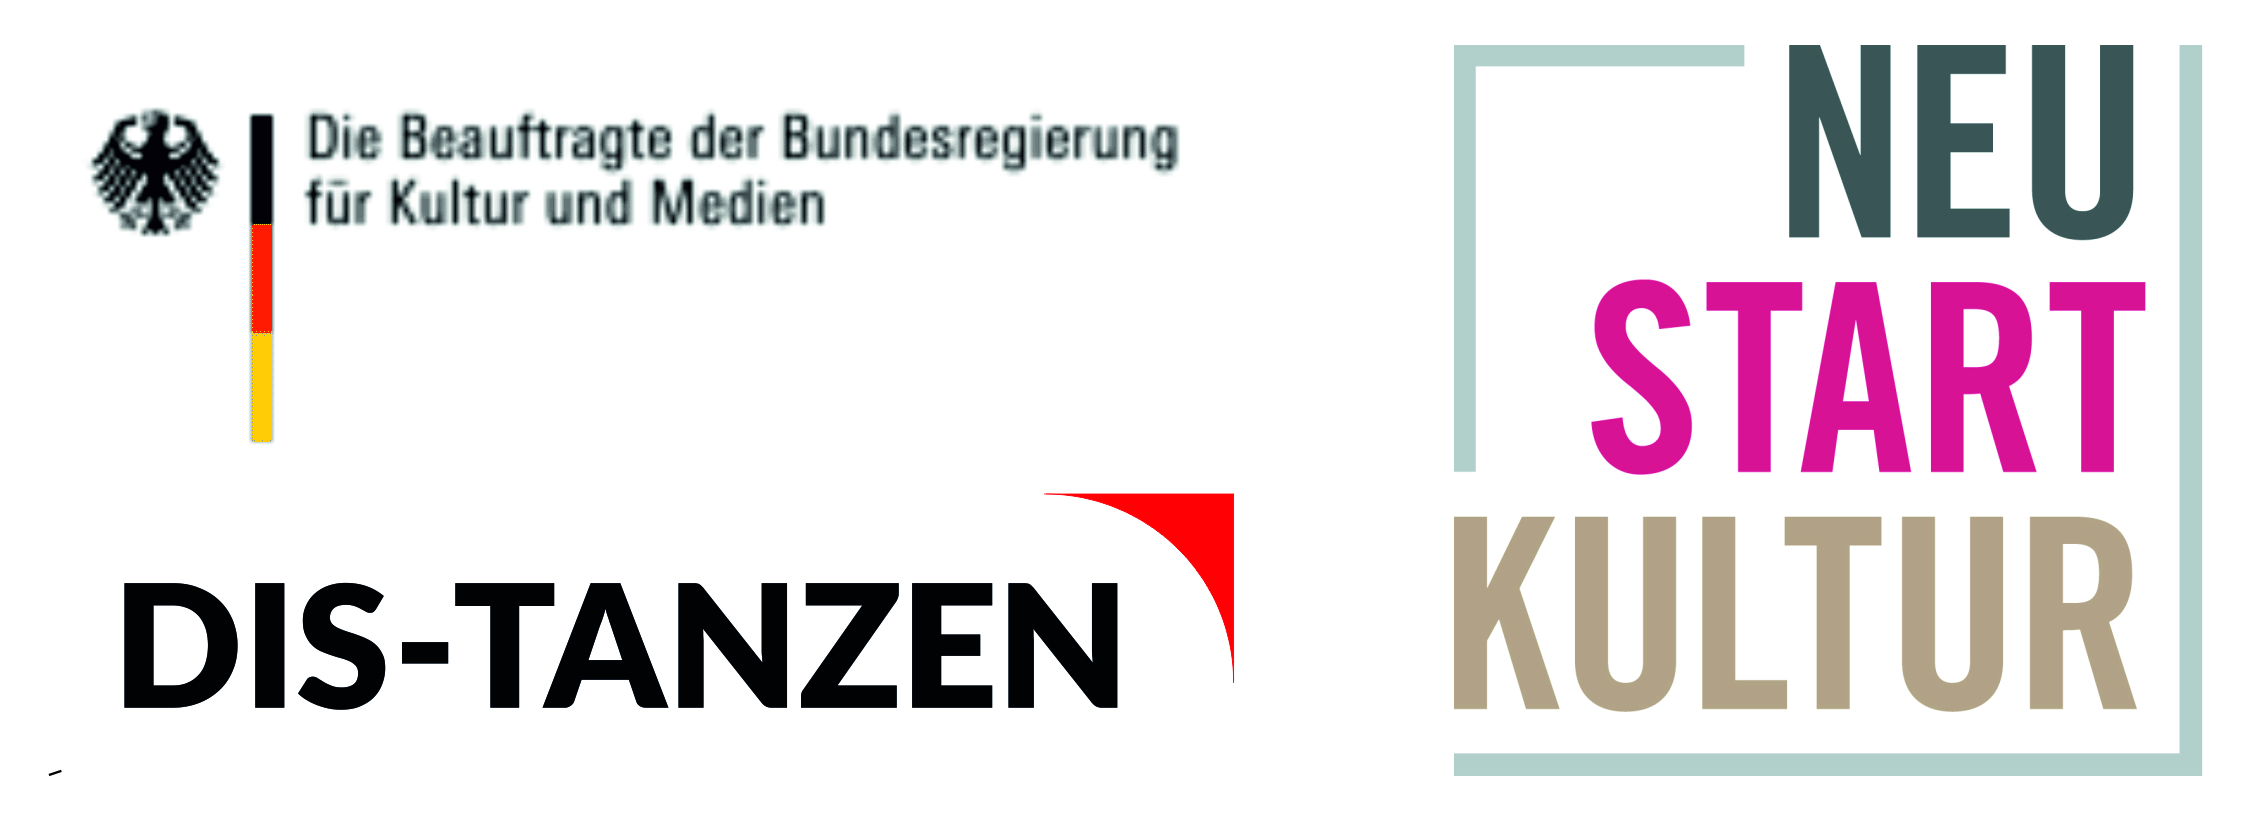 Funded by the Federal Commissioner of the Federal Government for Culture and Media (BKM) in the program NEUSTART KULTUR, aid program DIS-TANZEN of the Dachverband Tanz Deutschland